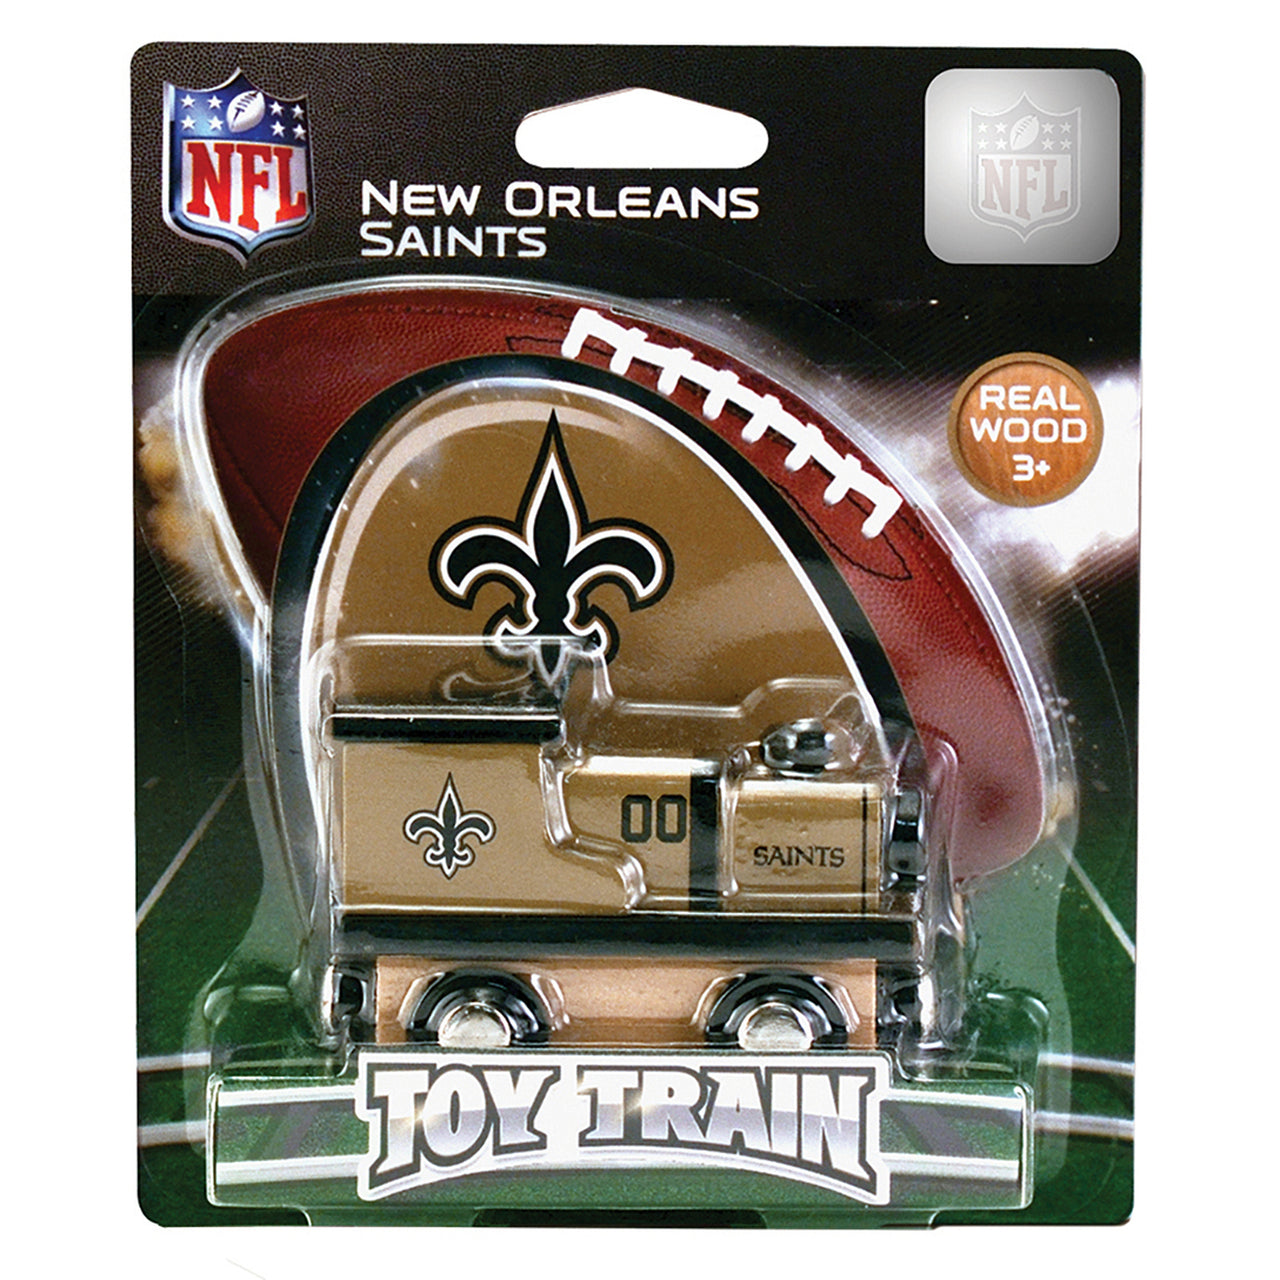 New Orleans Saints Wooden Toy Train Engine by Masterpieces